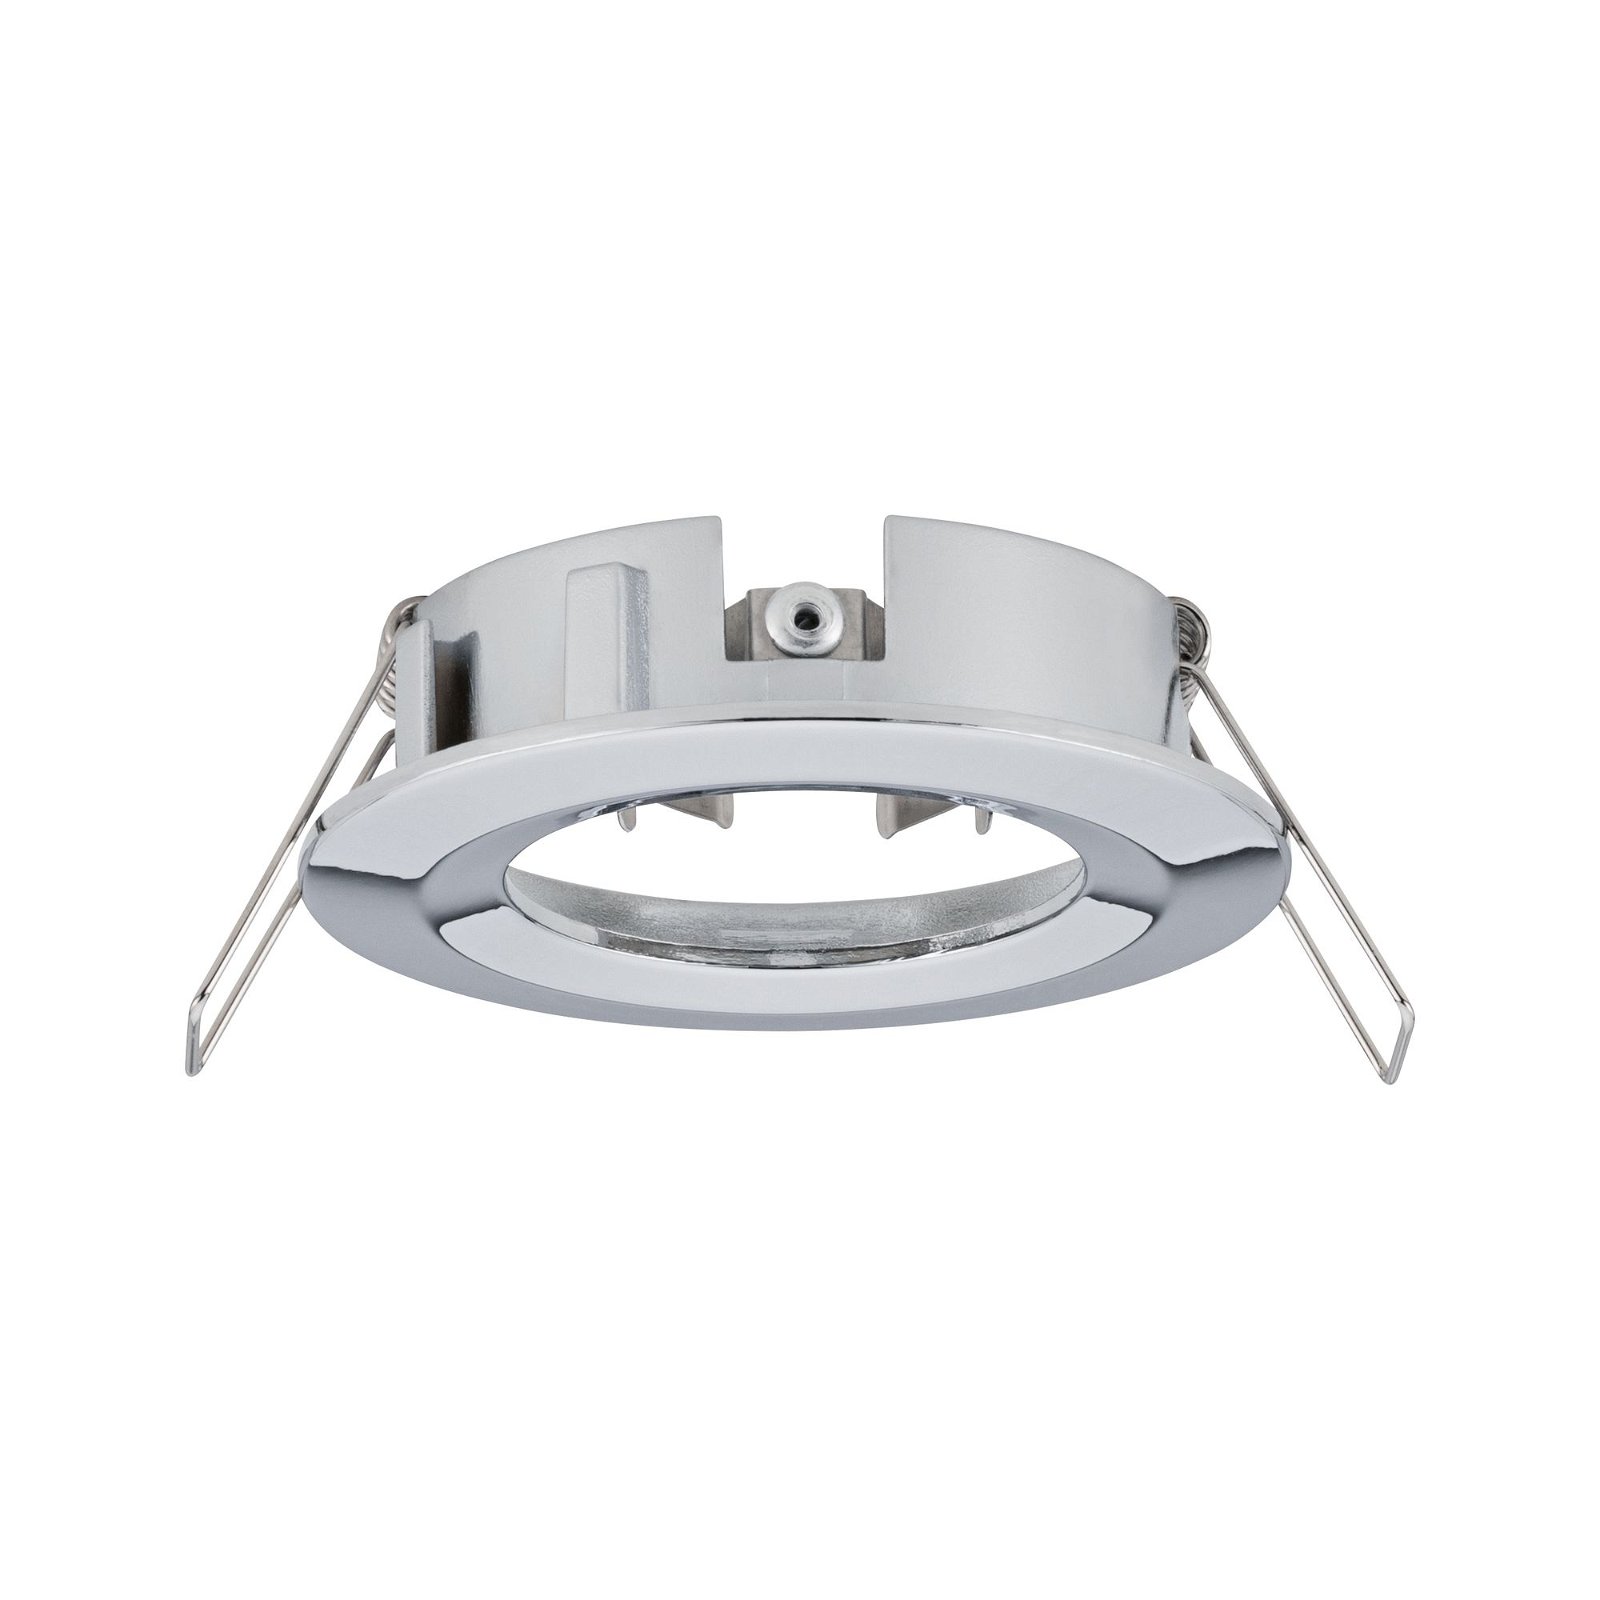 Recessed luminaire Choose Basic Set Rigid IP44 round 78mm max. 3x10W 230V dimmable Chrome